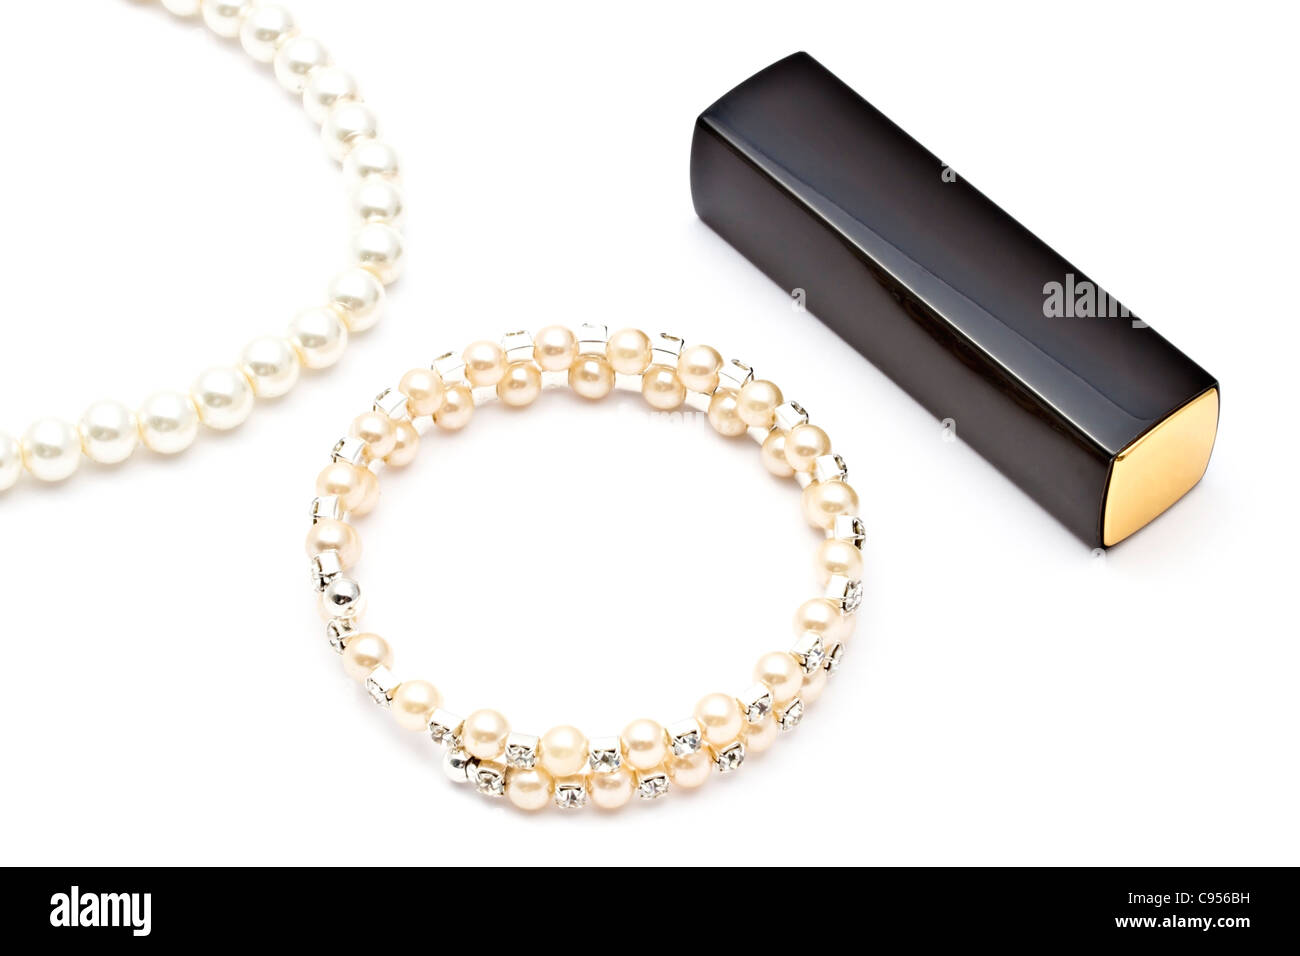 Pearl bracelet ,necklace and lipstick on white background Stock Photo